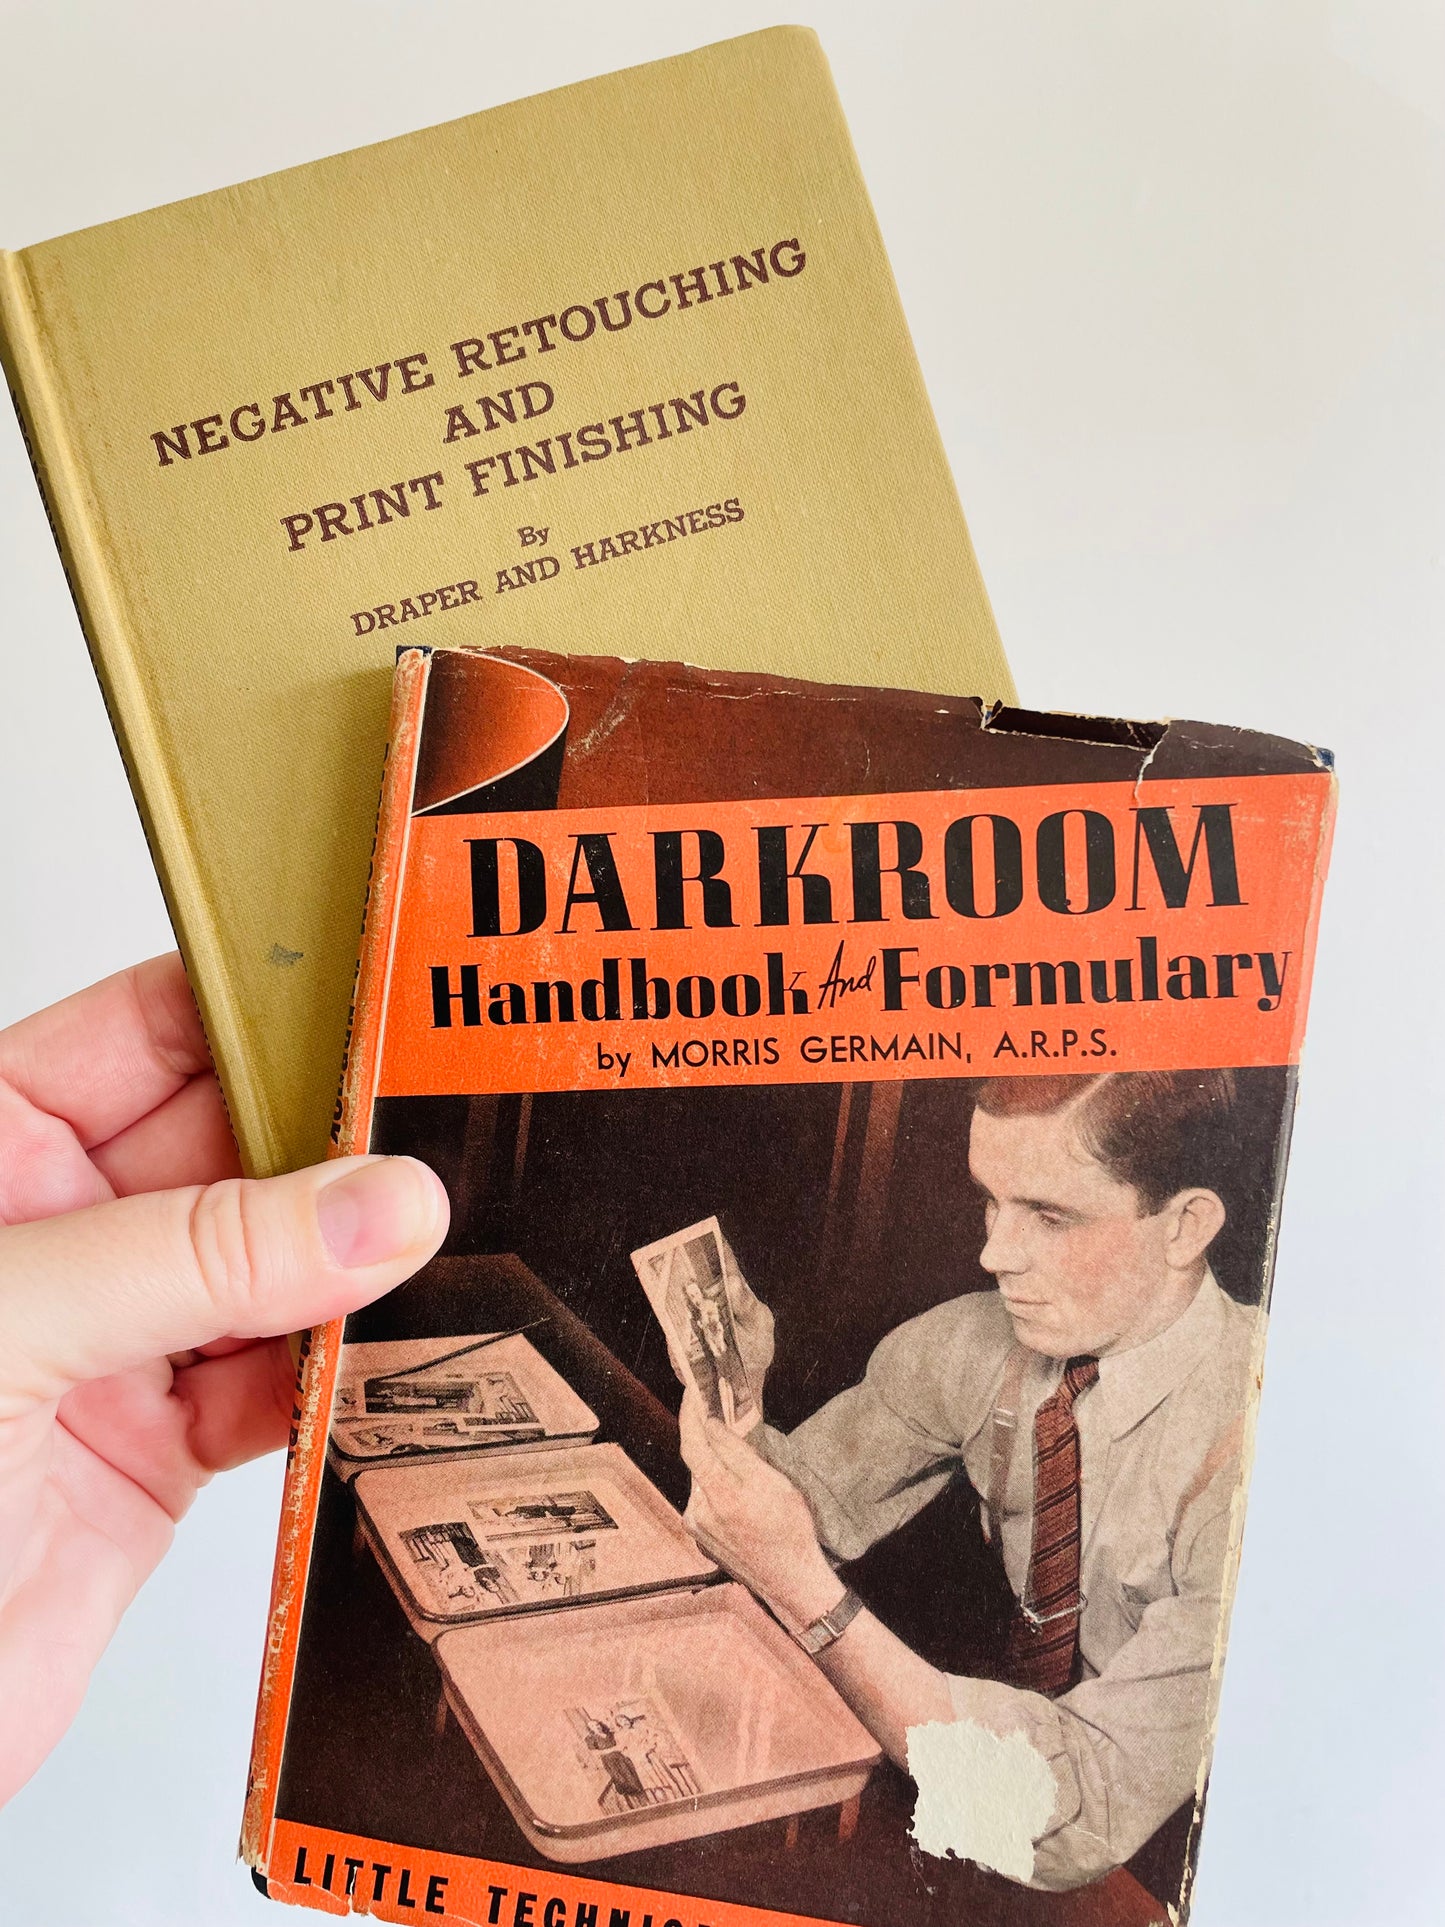 1940s Little Technical Library Hardcover Photography Pocket Books - Negative Retouching & Print Finishing and Darkroom Handbook & Formulary - Set of 2